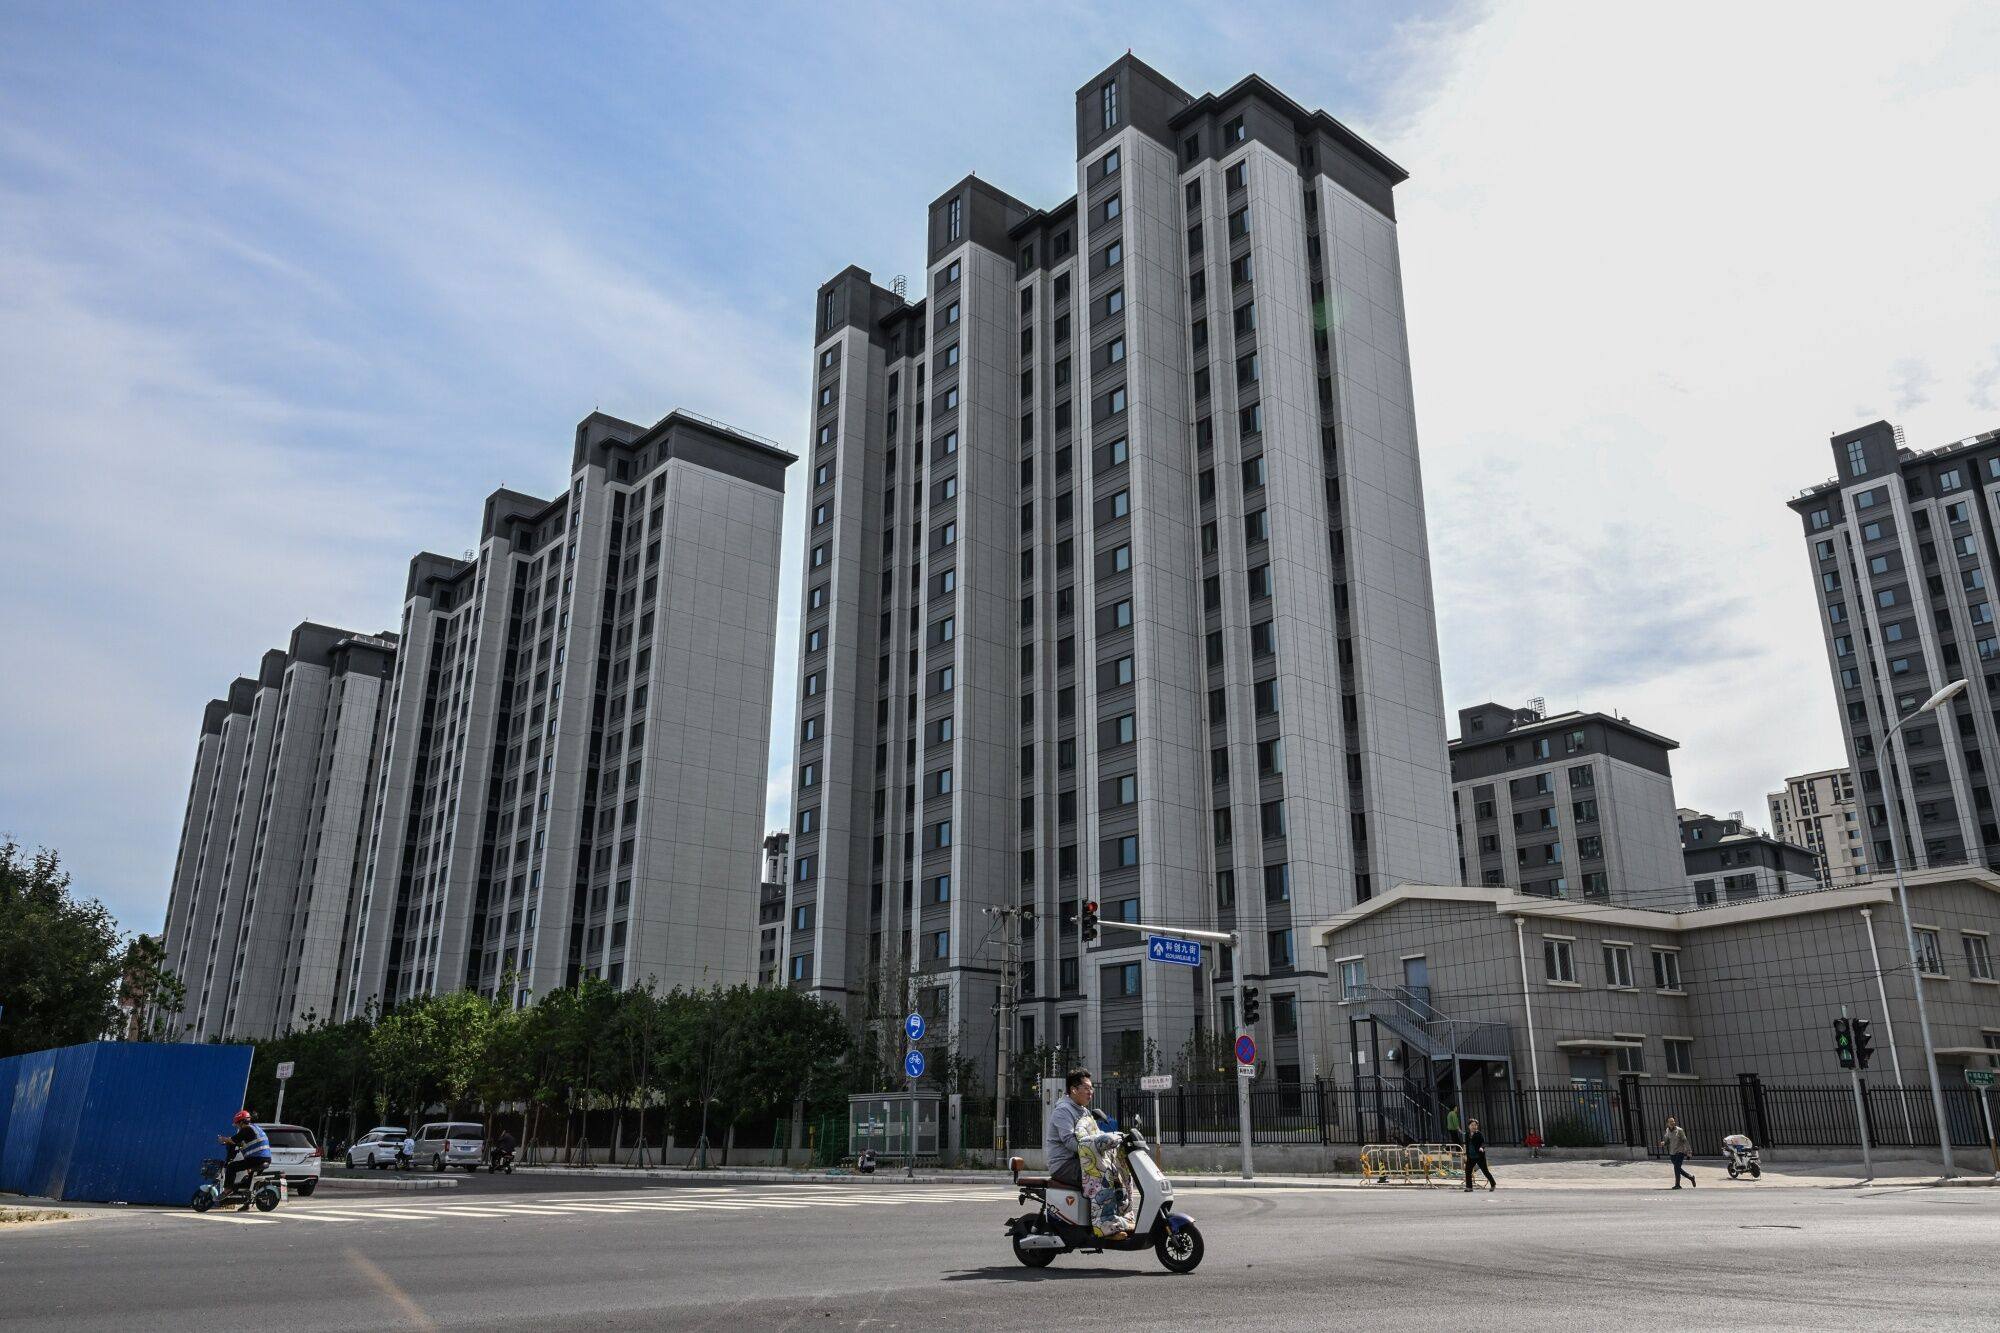 Cities across China could see big changes coming in property development under the nation’s new real estate development model. Photo: Bloomberg